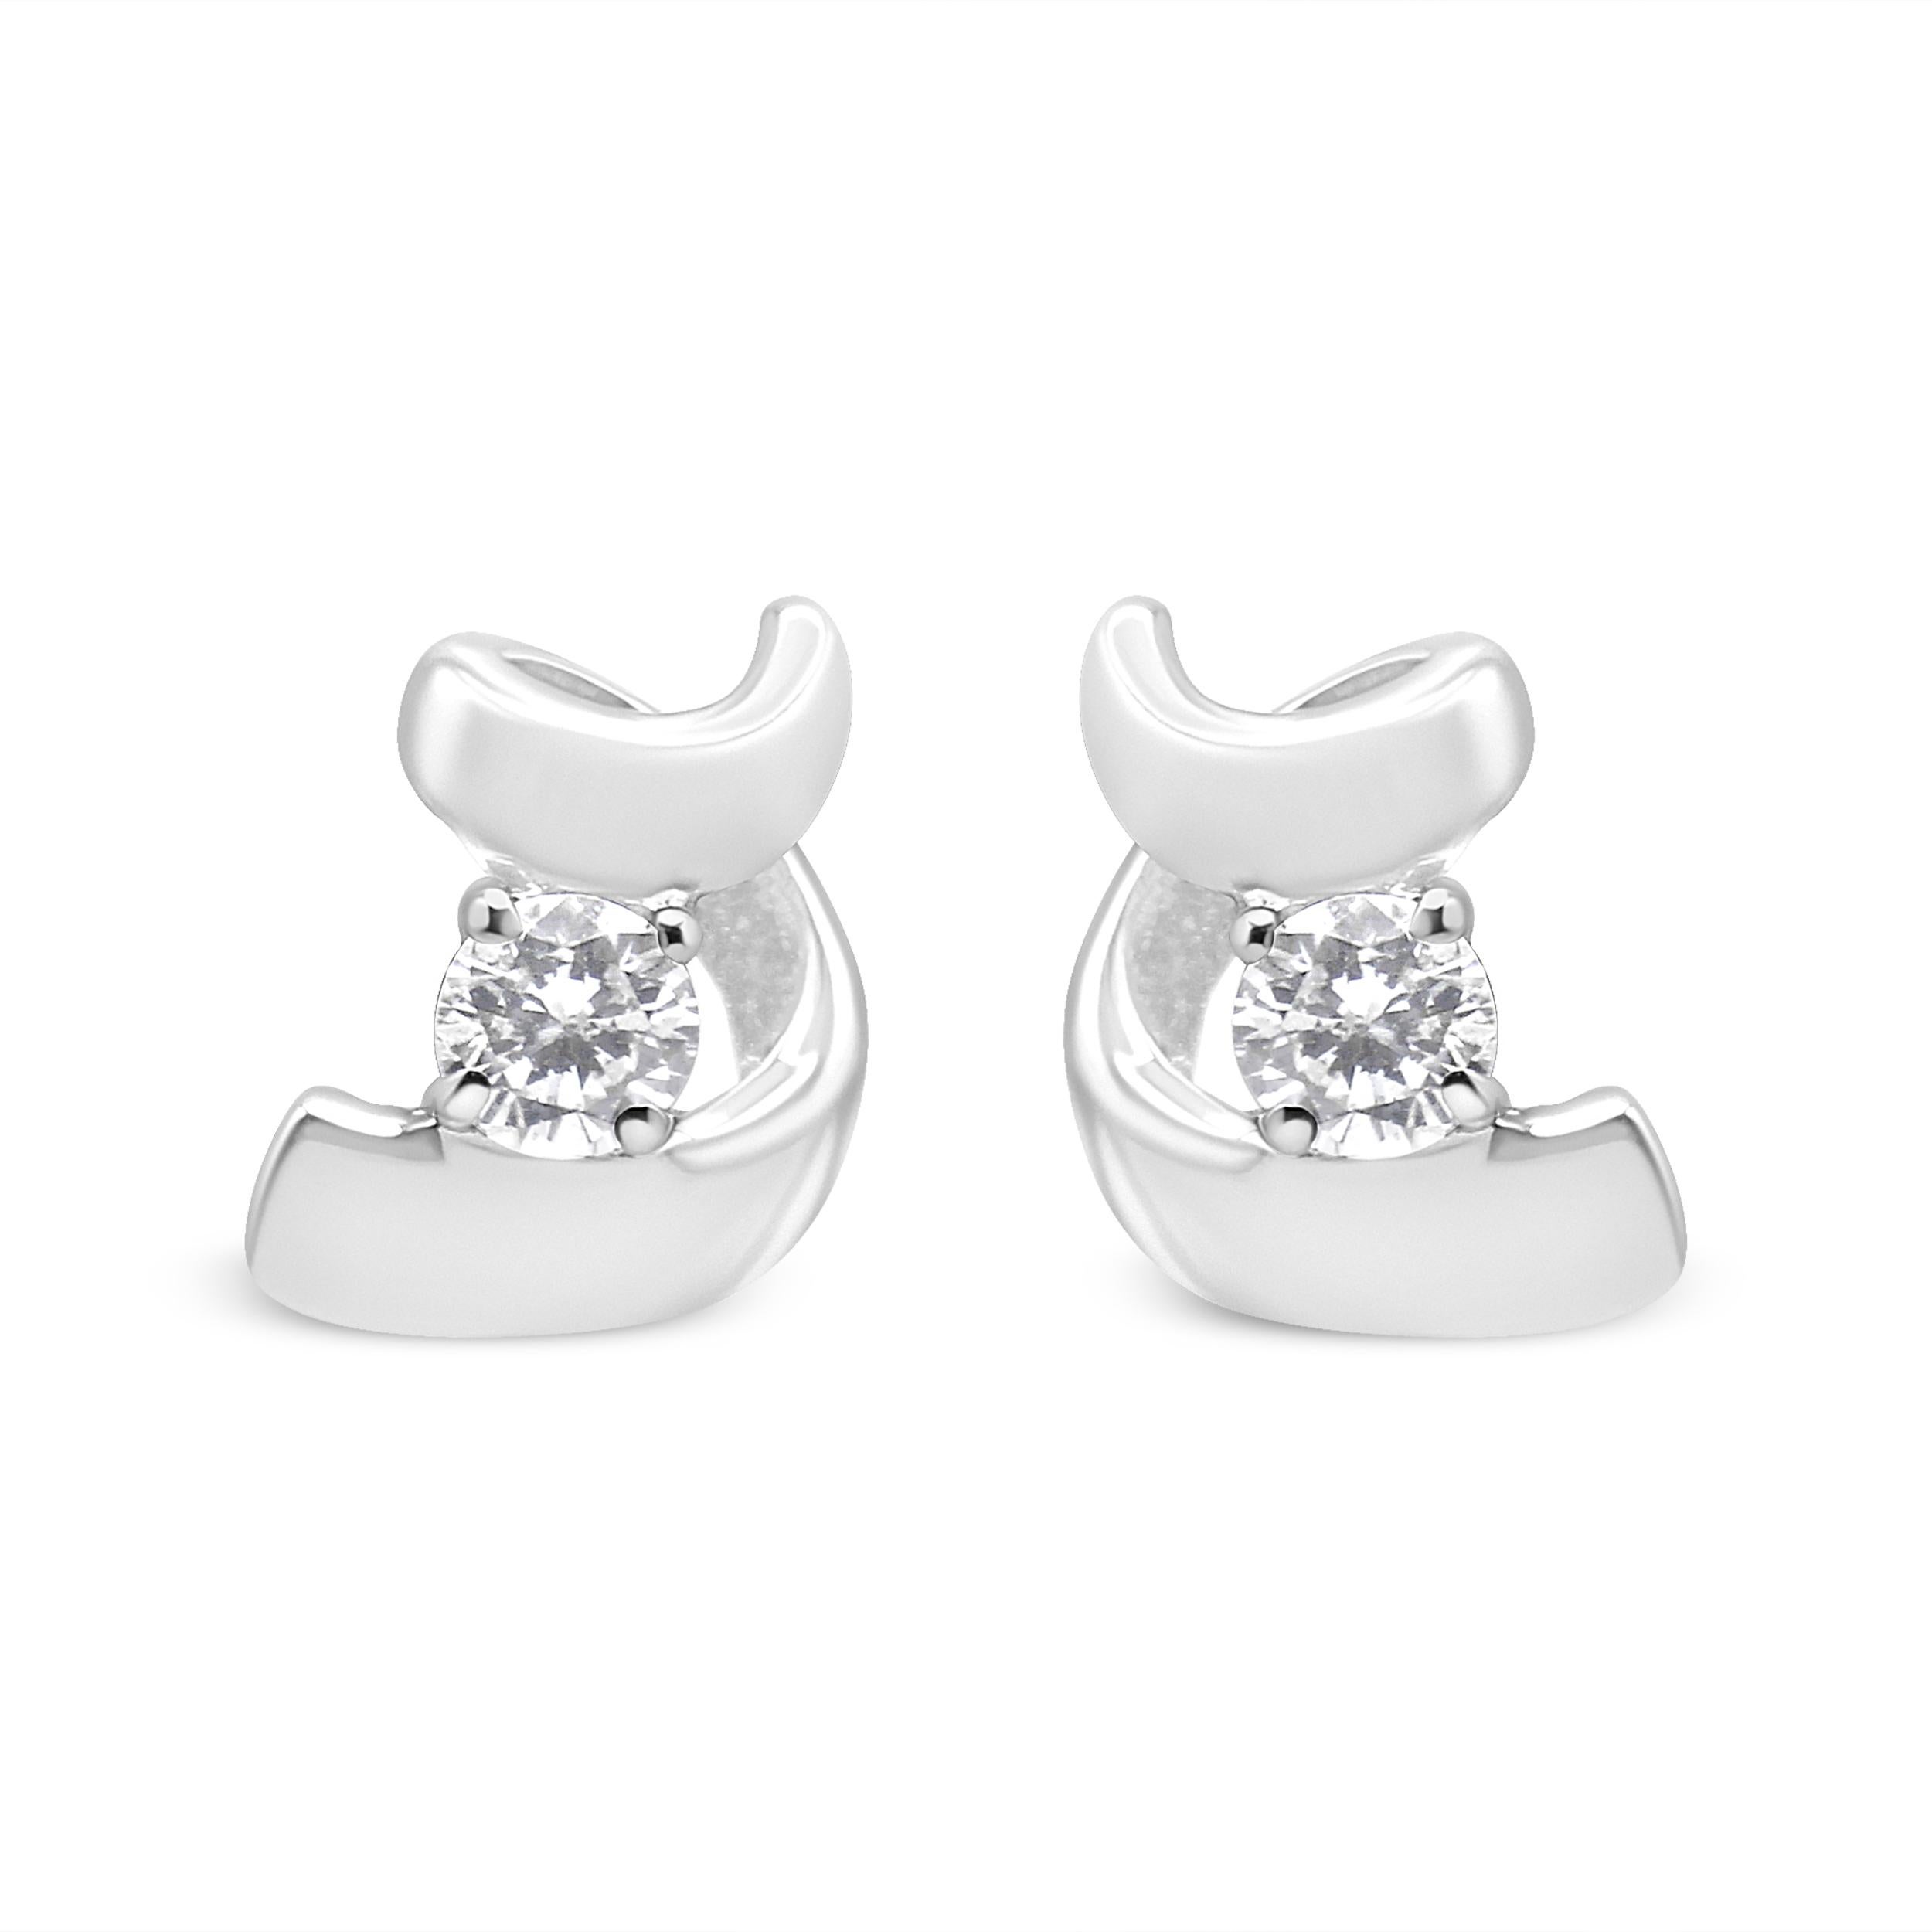 Add sparkle to your look with these solitaire earrings. Crafted in 10k white gold, these earrings display 1/10 carat TDW of round cut diamonds. A glittering prong set diamond sits in the middle of a white gold ribbons that twists and creates a